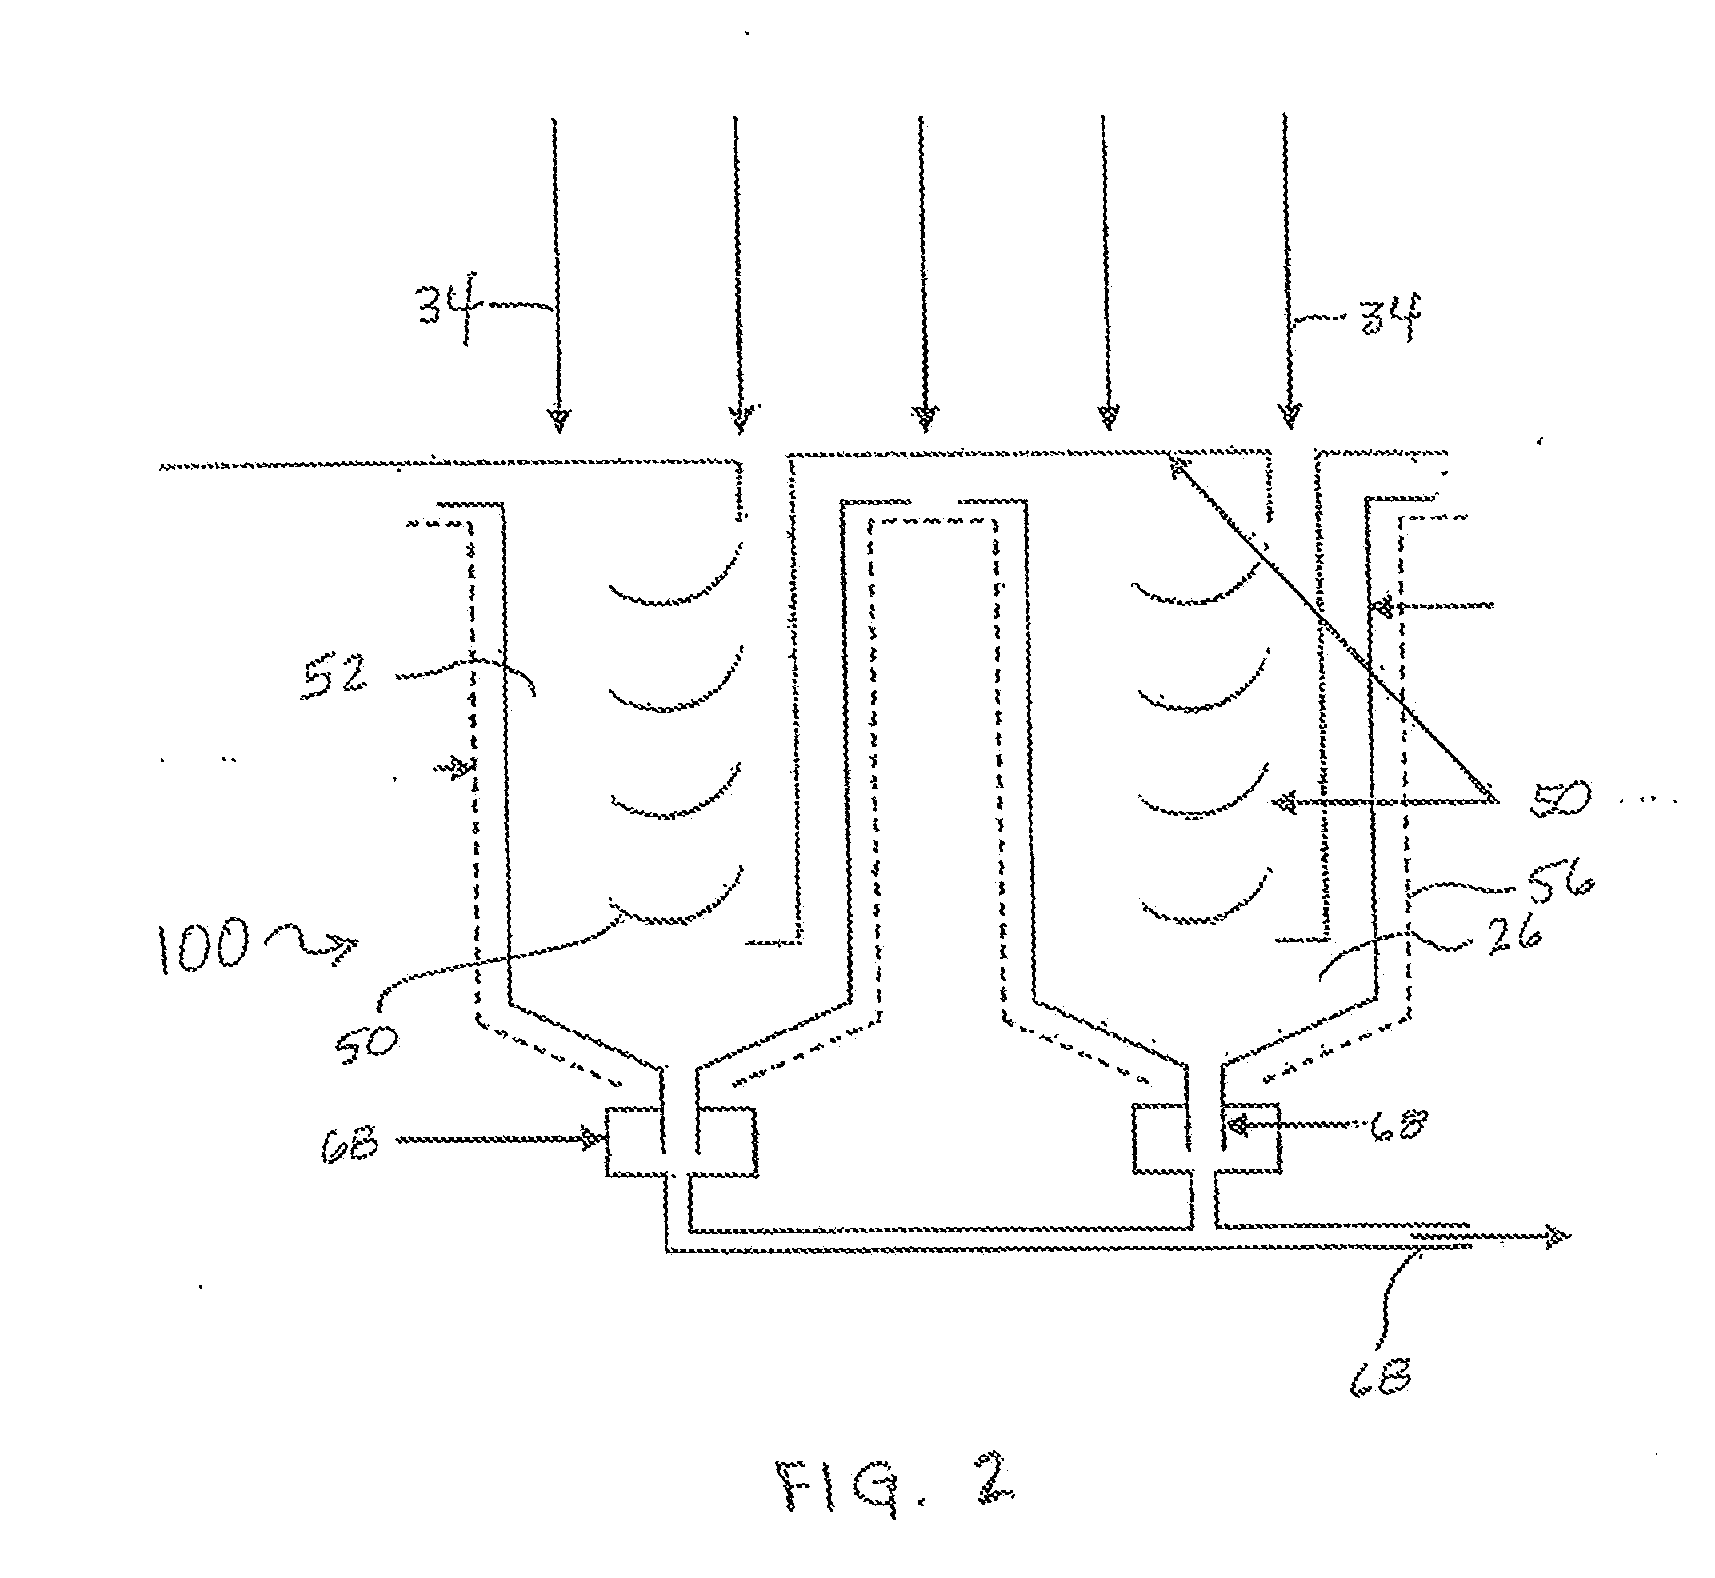 Systems, Apparatus and Methods for Coating the Interior of a Container Using a Photolysis and/or Thermal Chemical Vapor Deposition Process